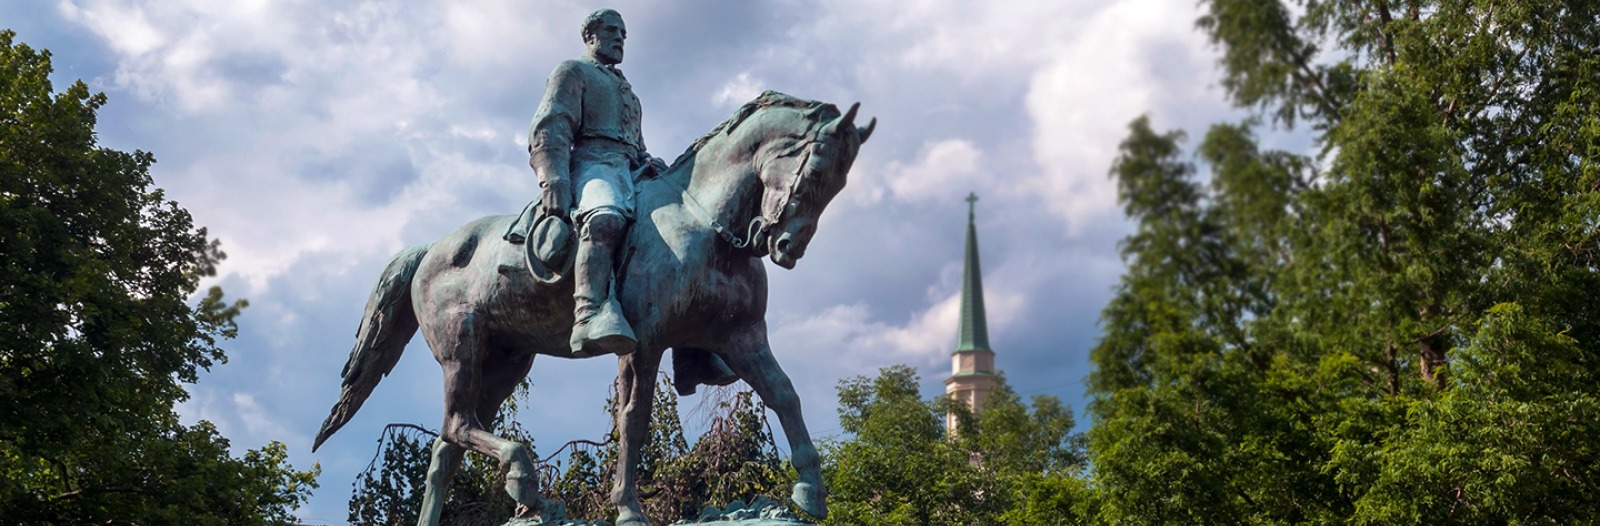 Statue of Robert E. Lee on a horse